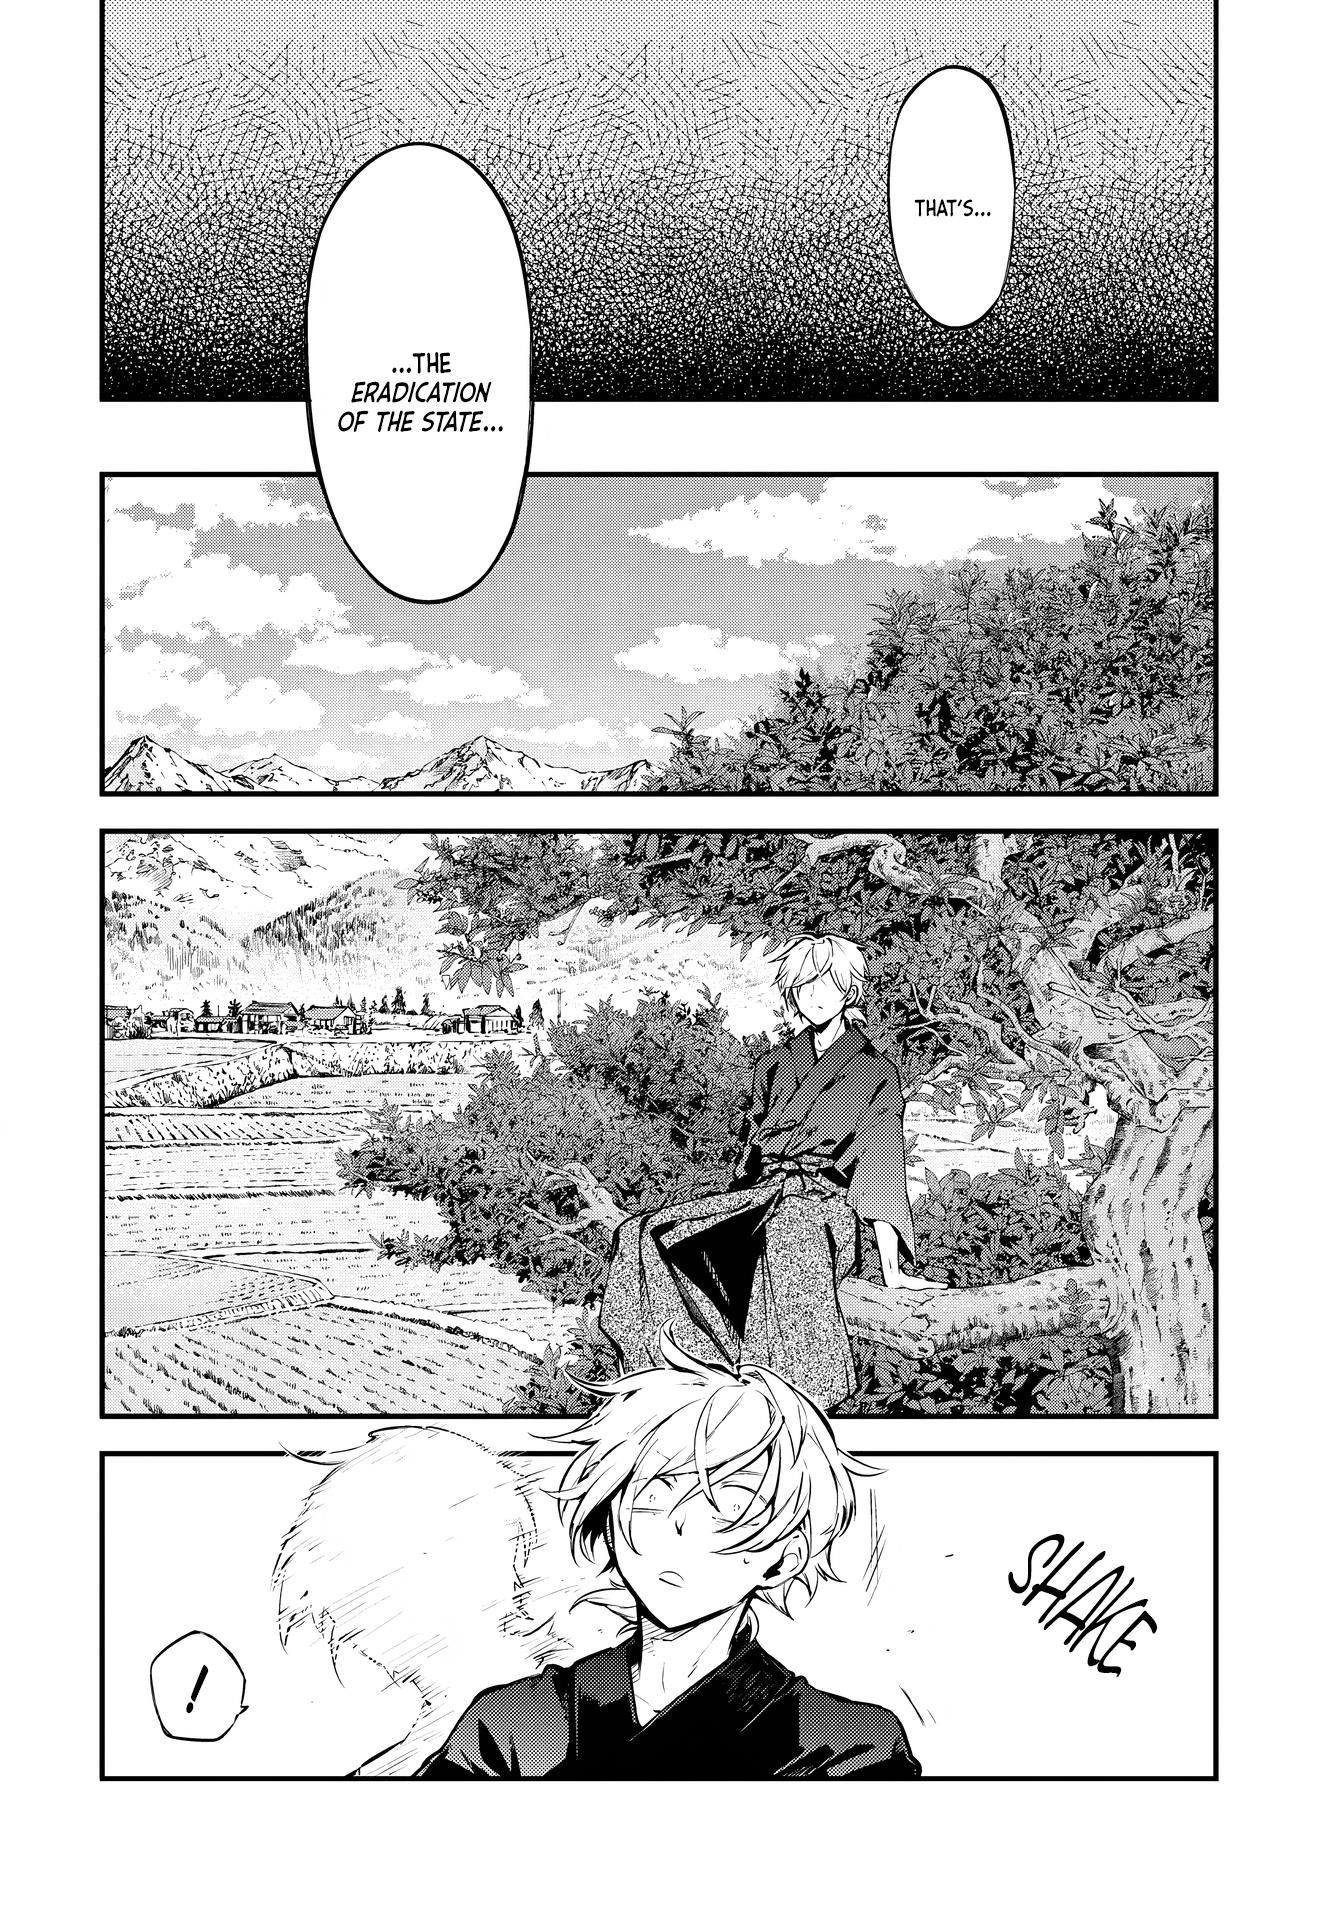 Bungo Stray Dogs chapter 112 page 21